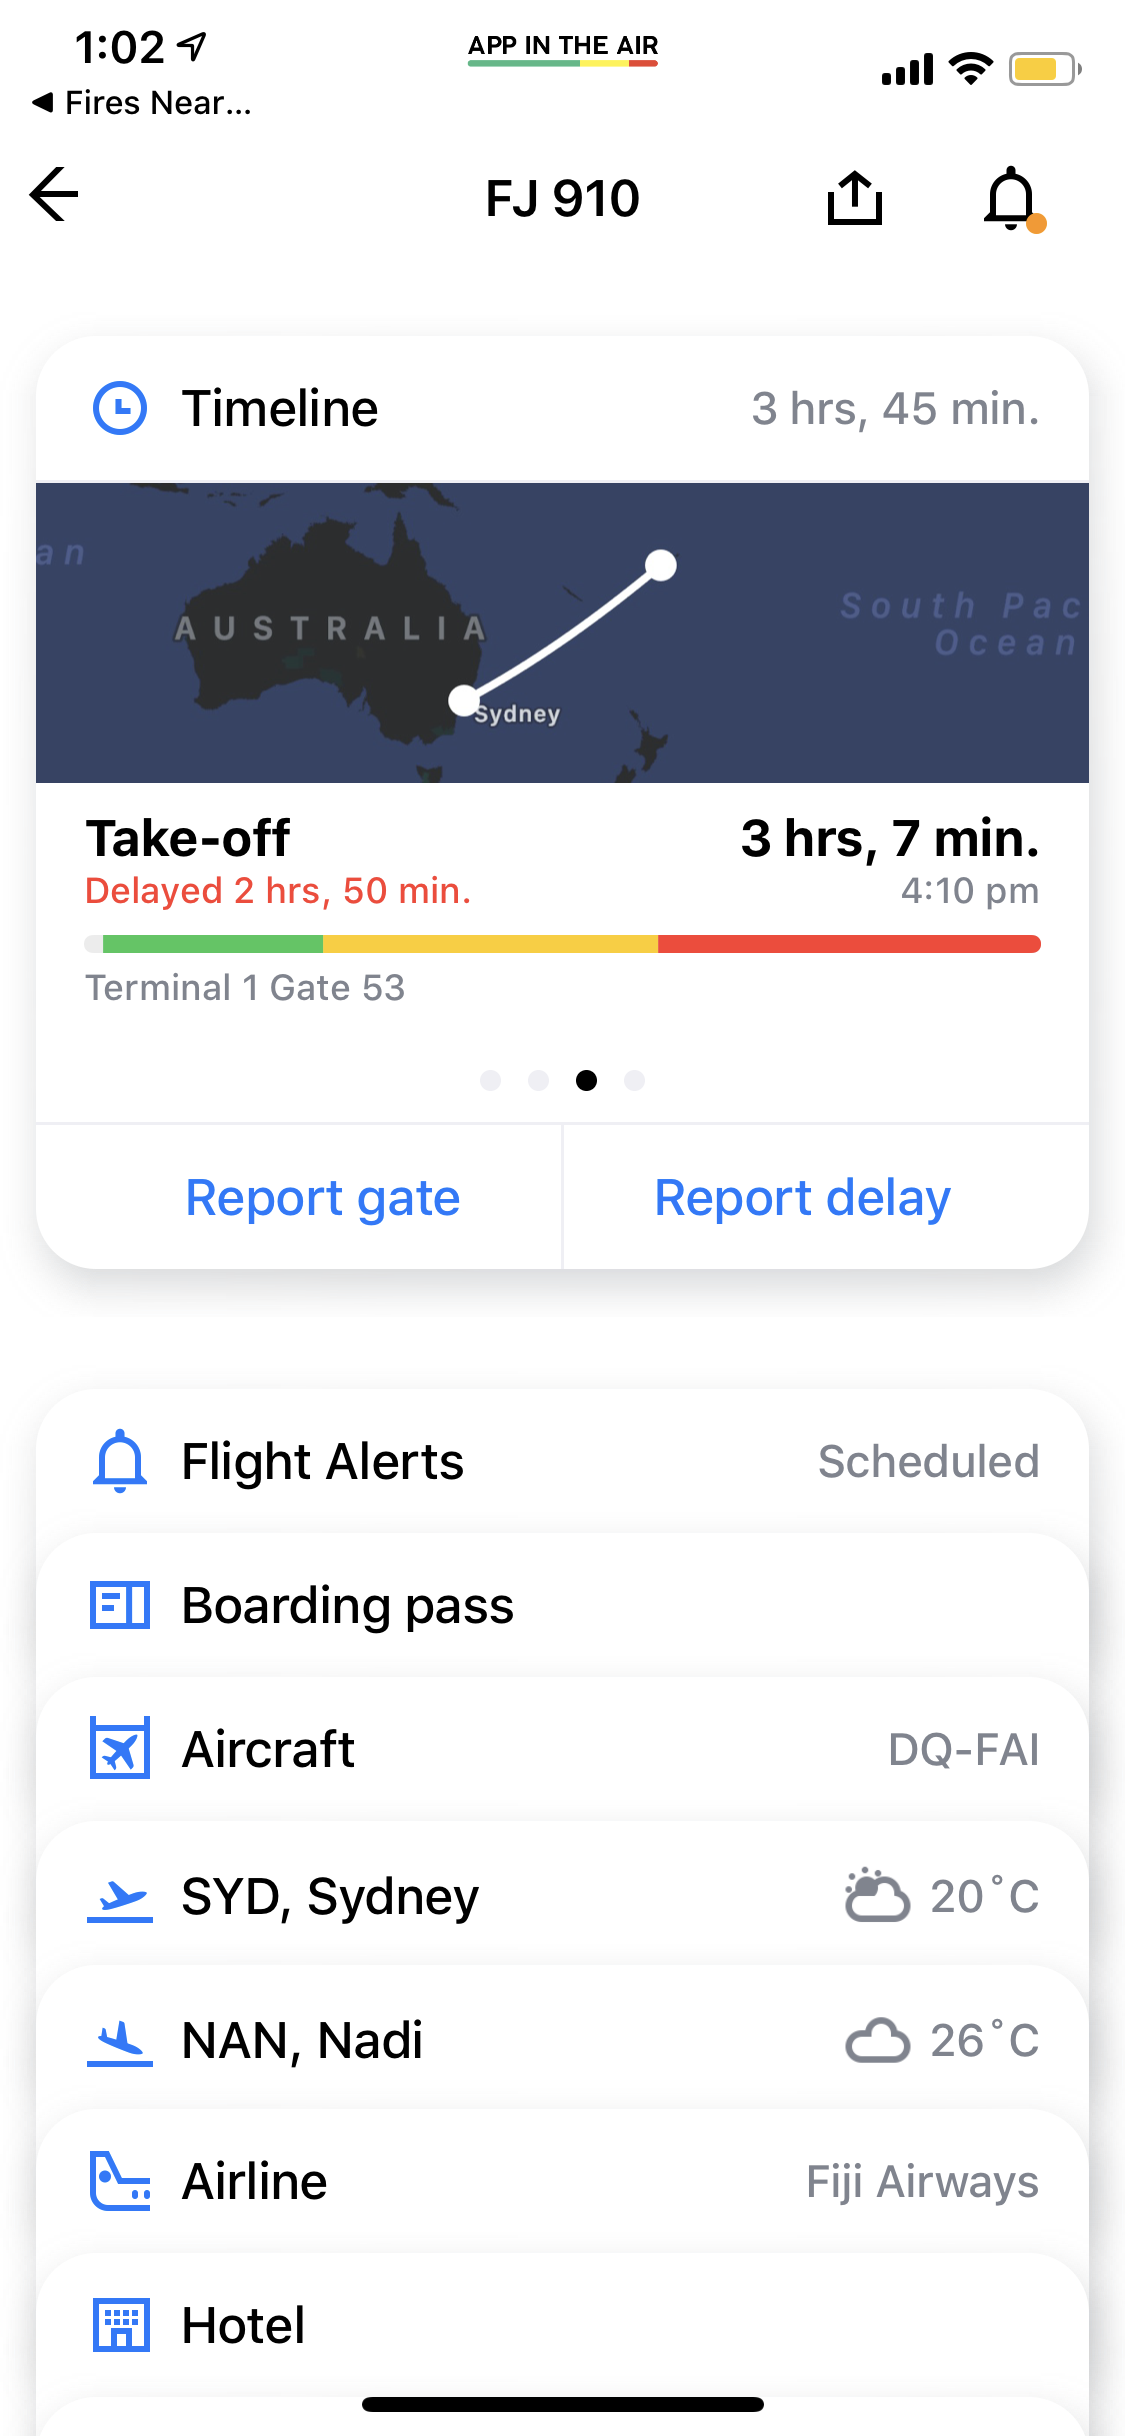 App in the Air Delay Notification